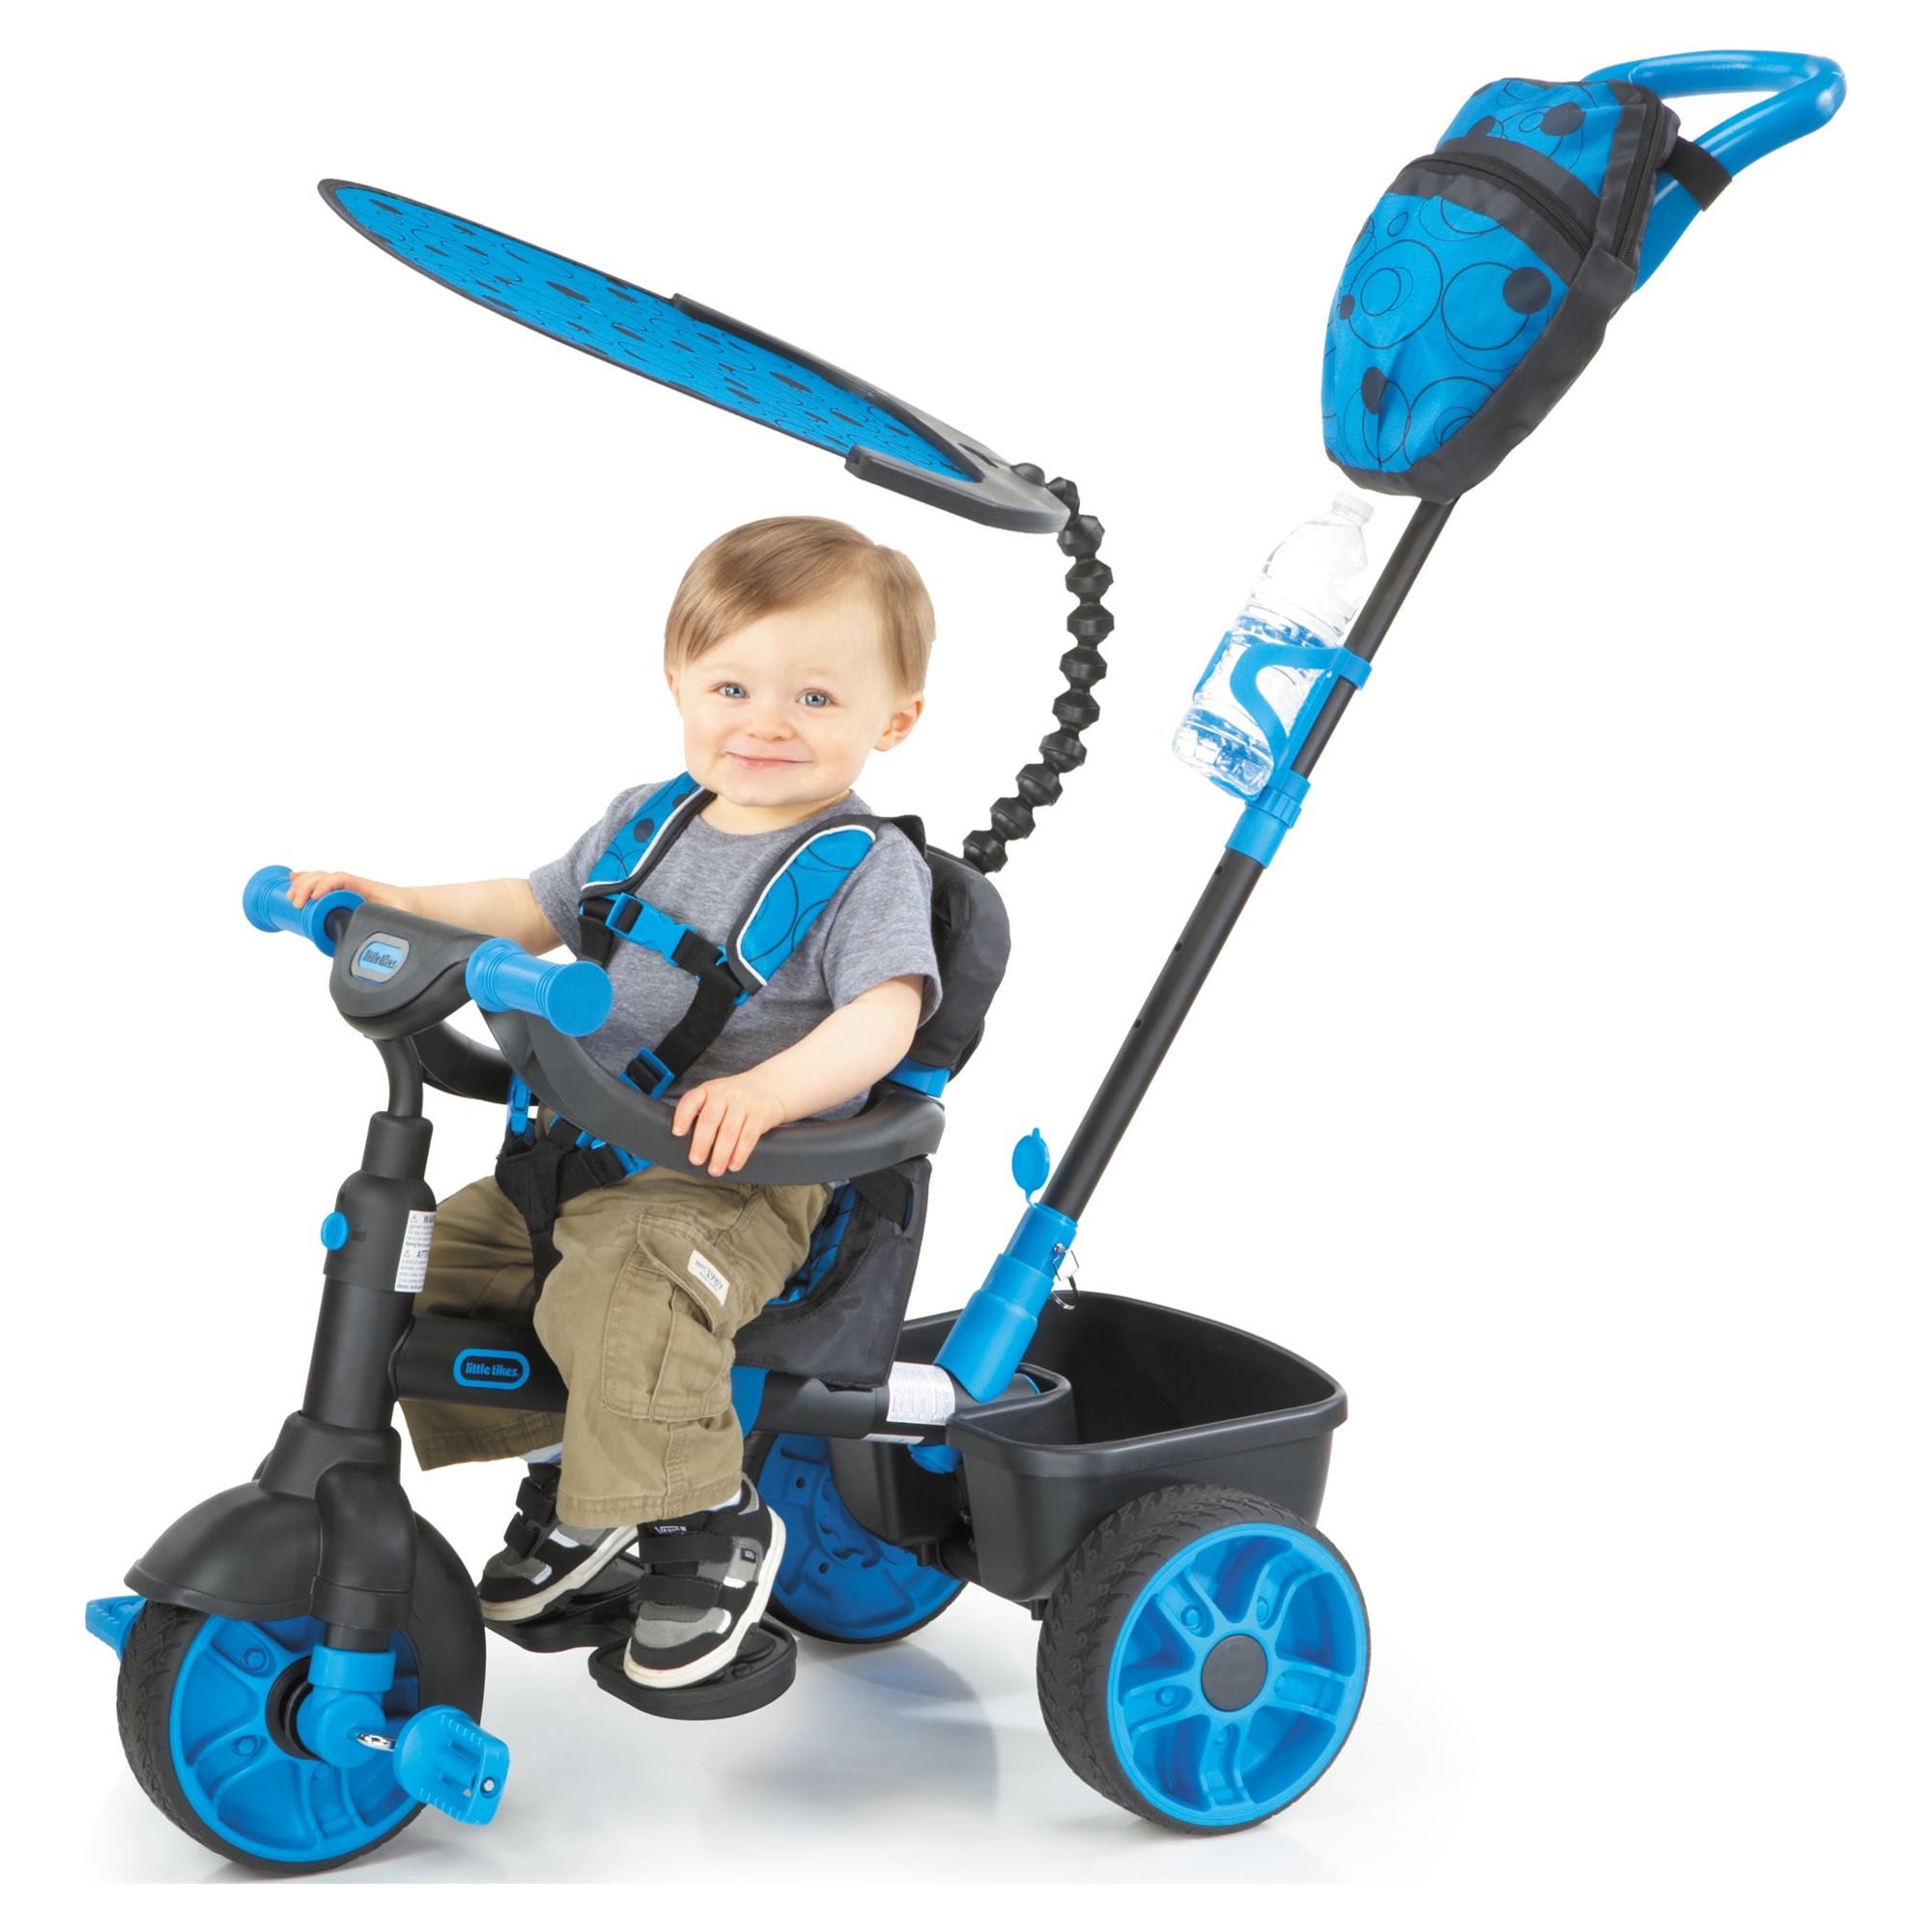 Little Tikes 4-in-1 Deluxe Edition Neon Blue Trike, Convertible Tricycle w/ 4 Stages of Growth & Shade Canopy, Toddlers, Kids Boys Girls Ages 9 Months to 3 Years - image 1 of 7